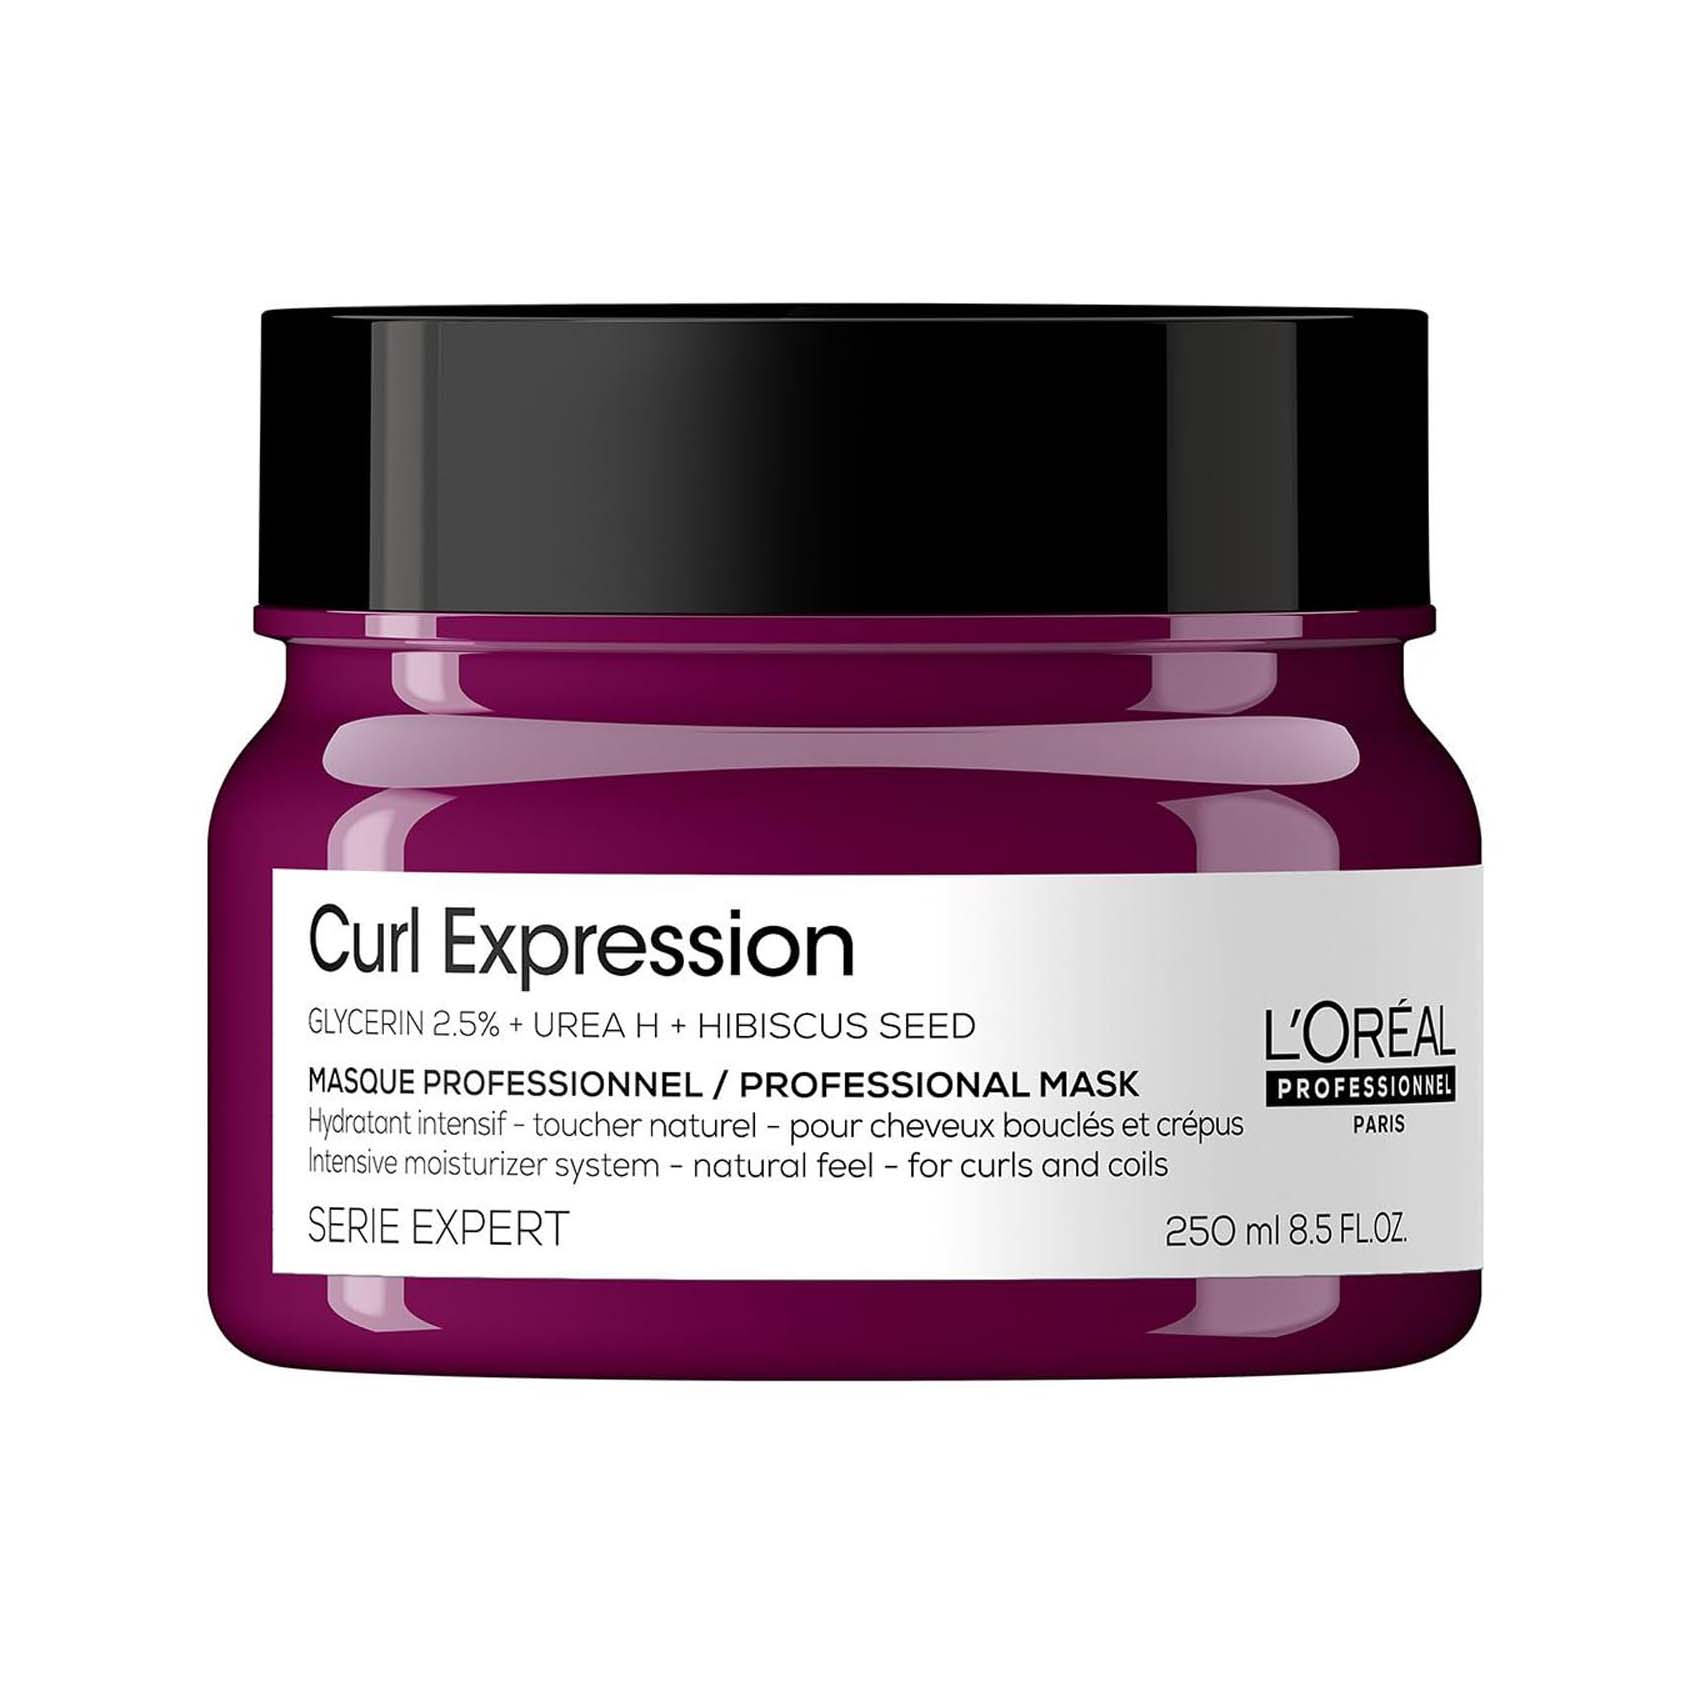 L'Oreal Curl Expression Professional Hair Mask - 250ml - Bloom Pharmacy